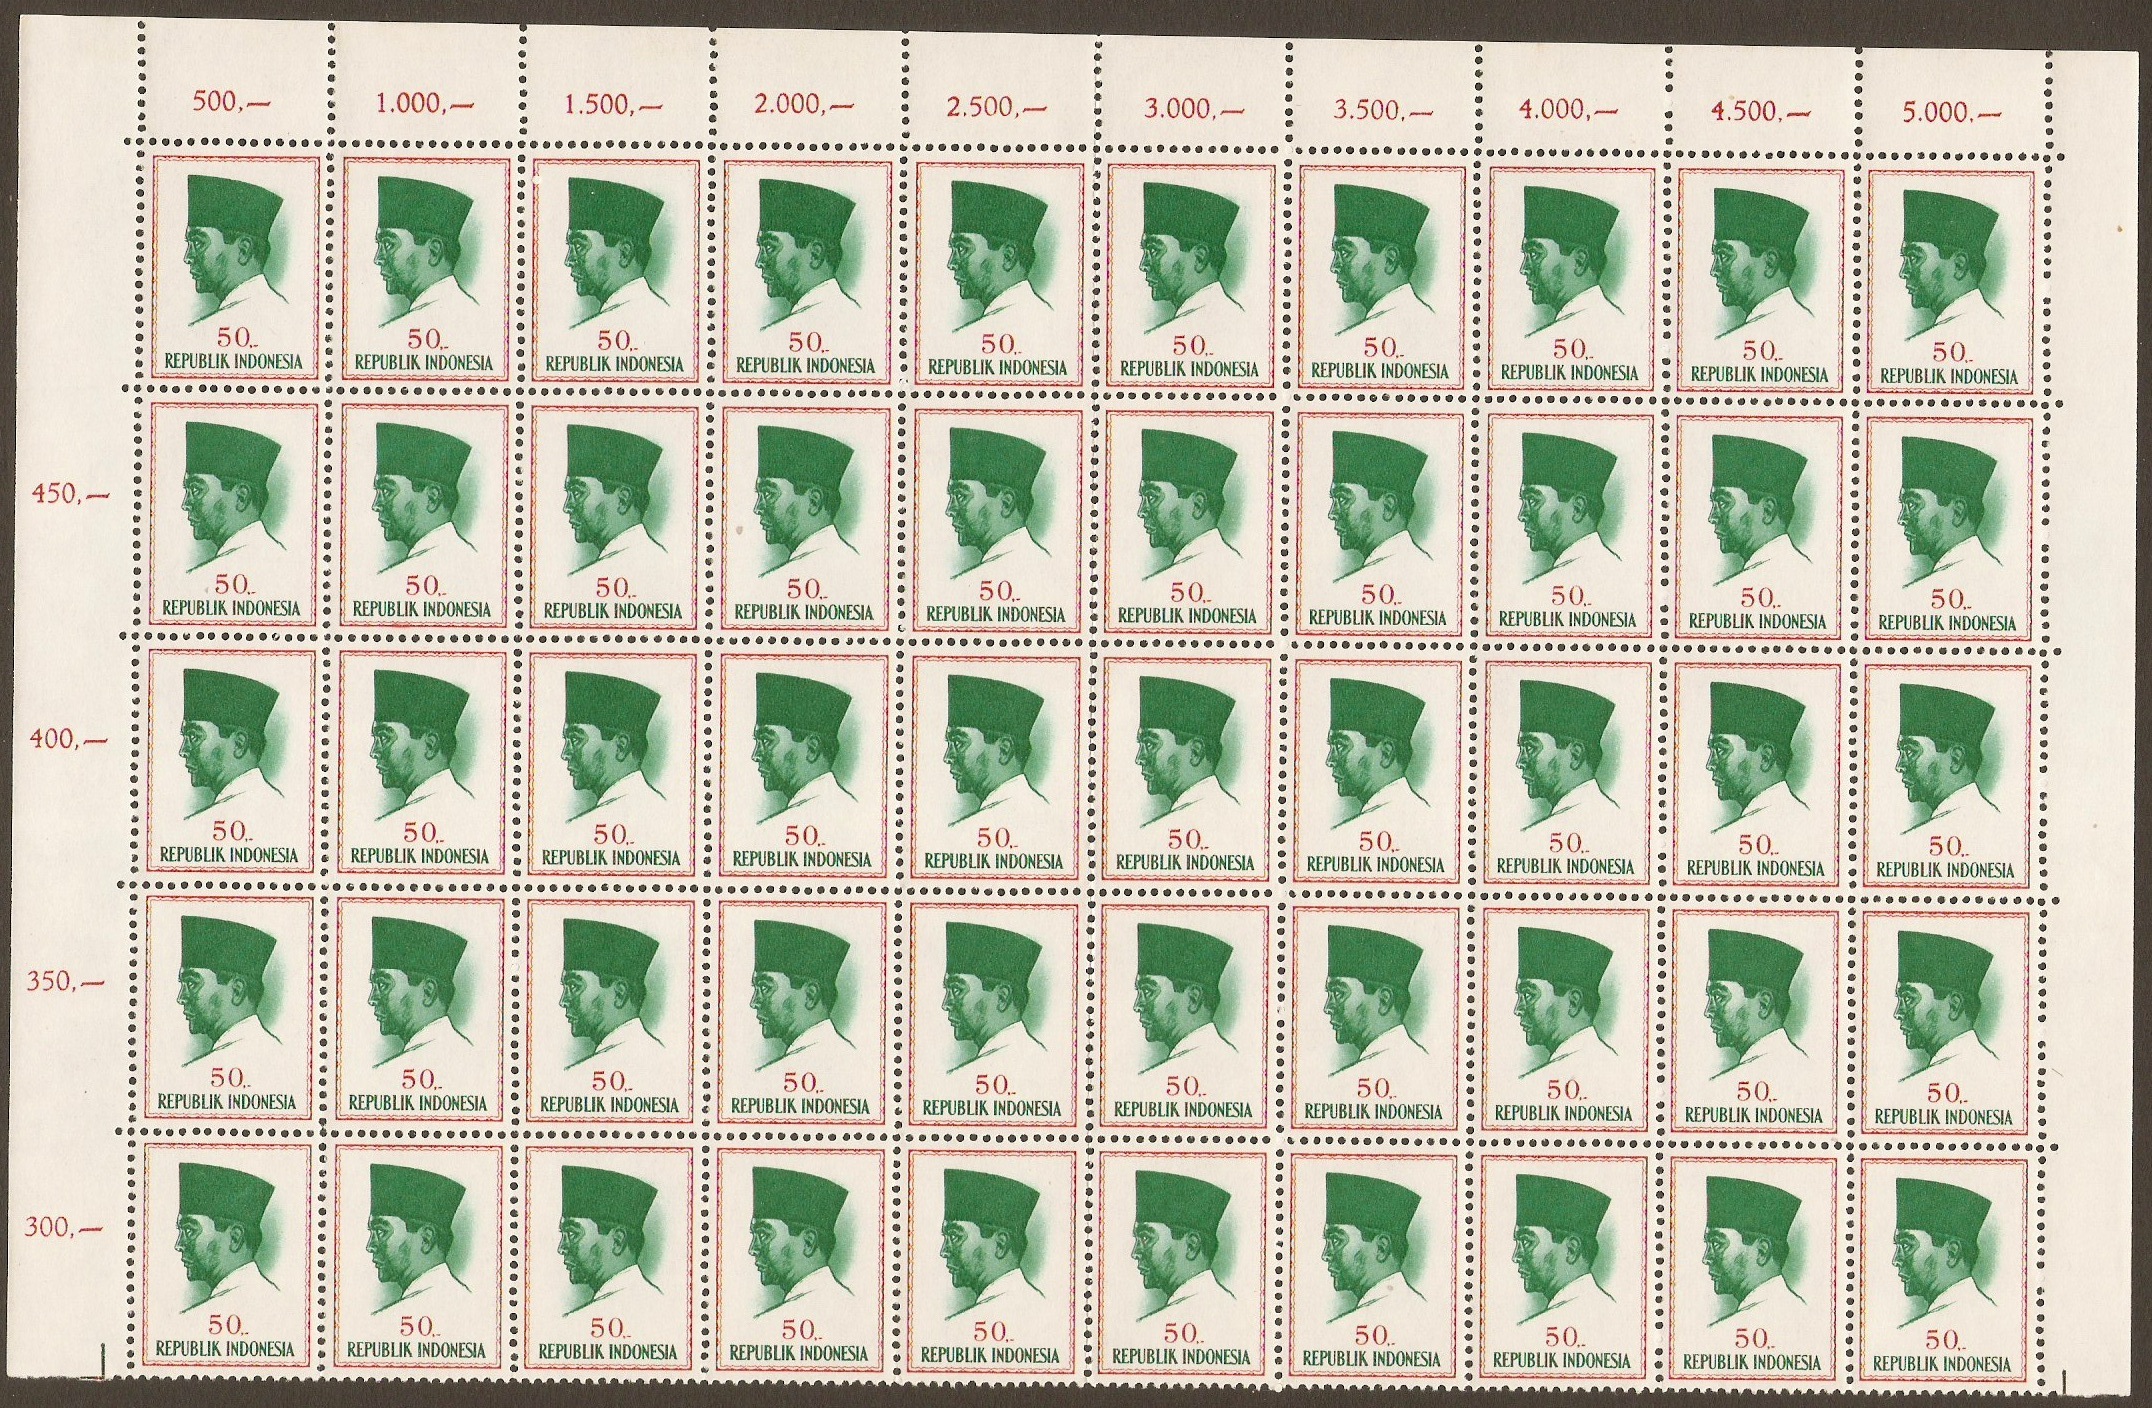 Indonesia 1964 50r Green and red-Pres. Sukarno Series. SG992.